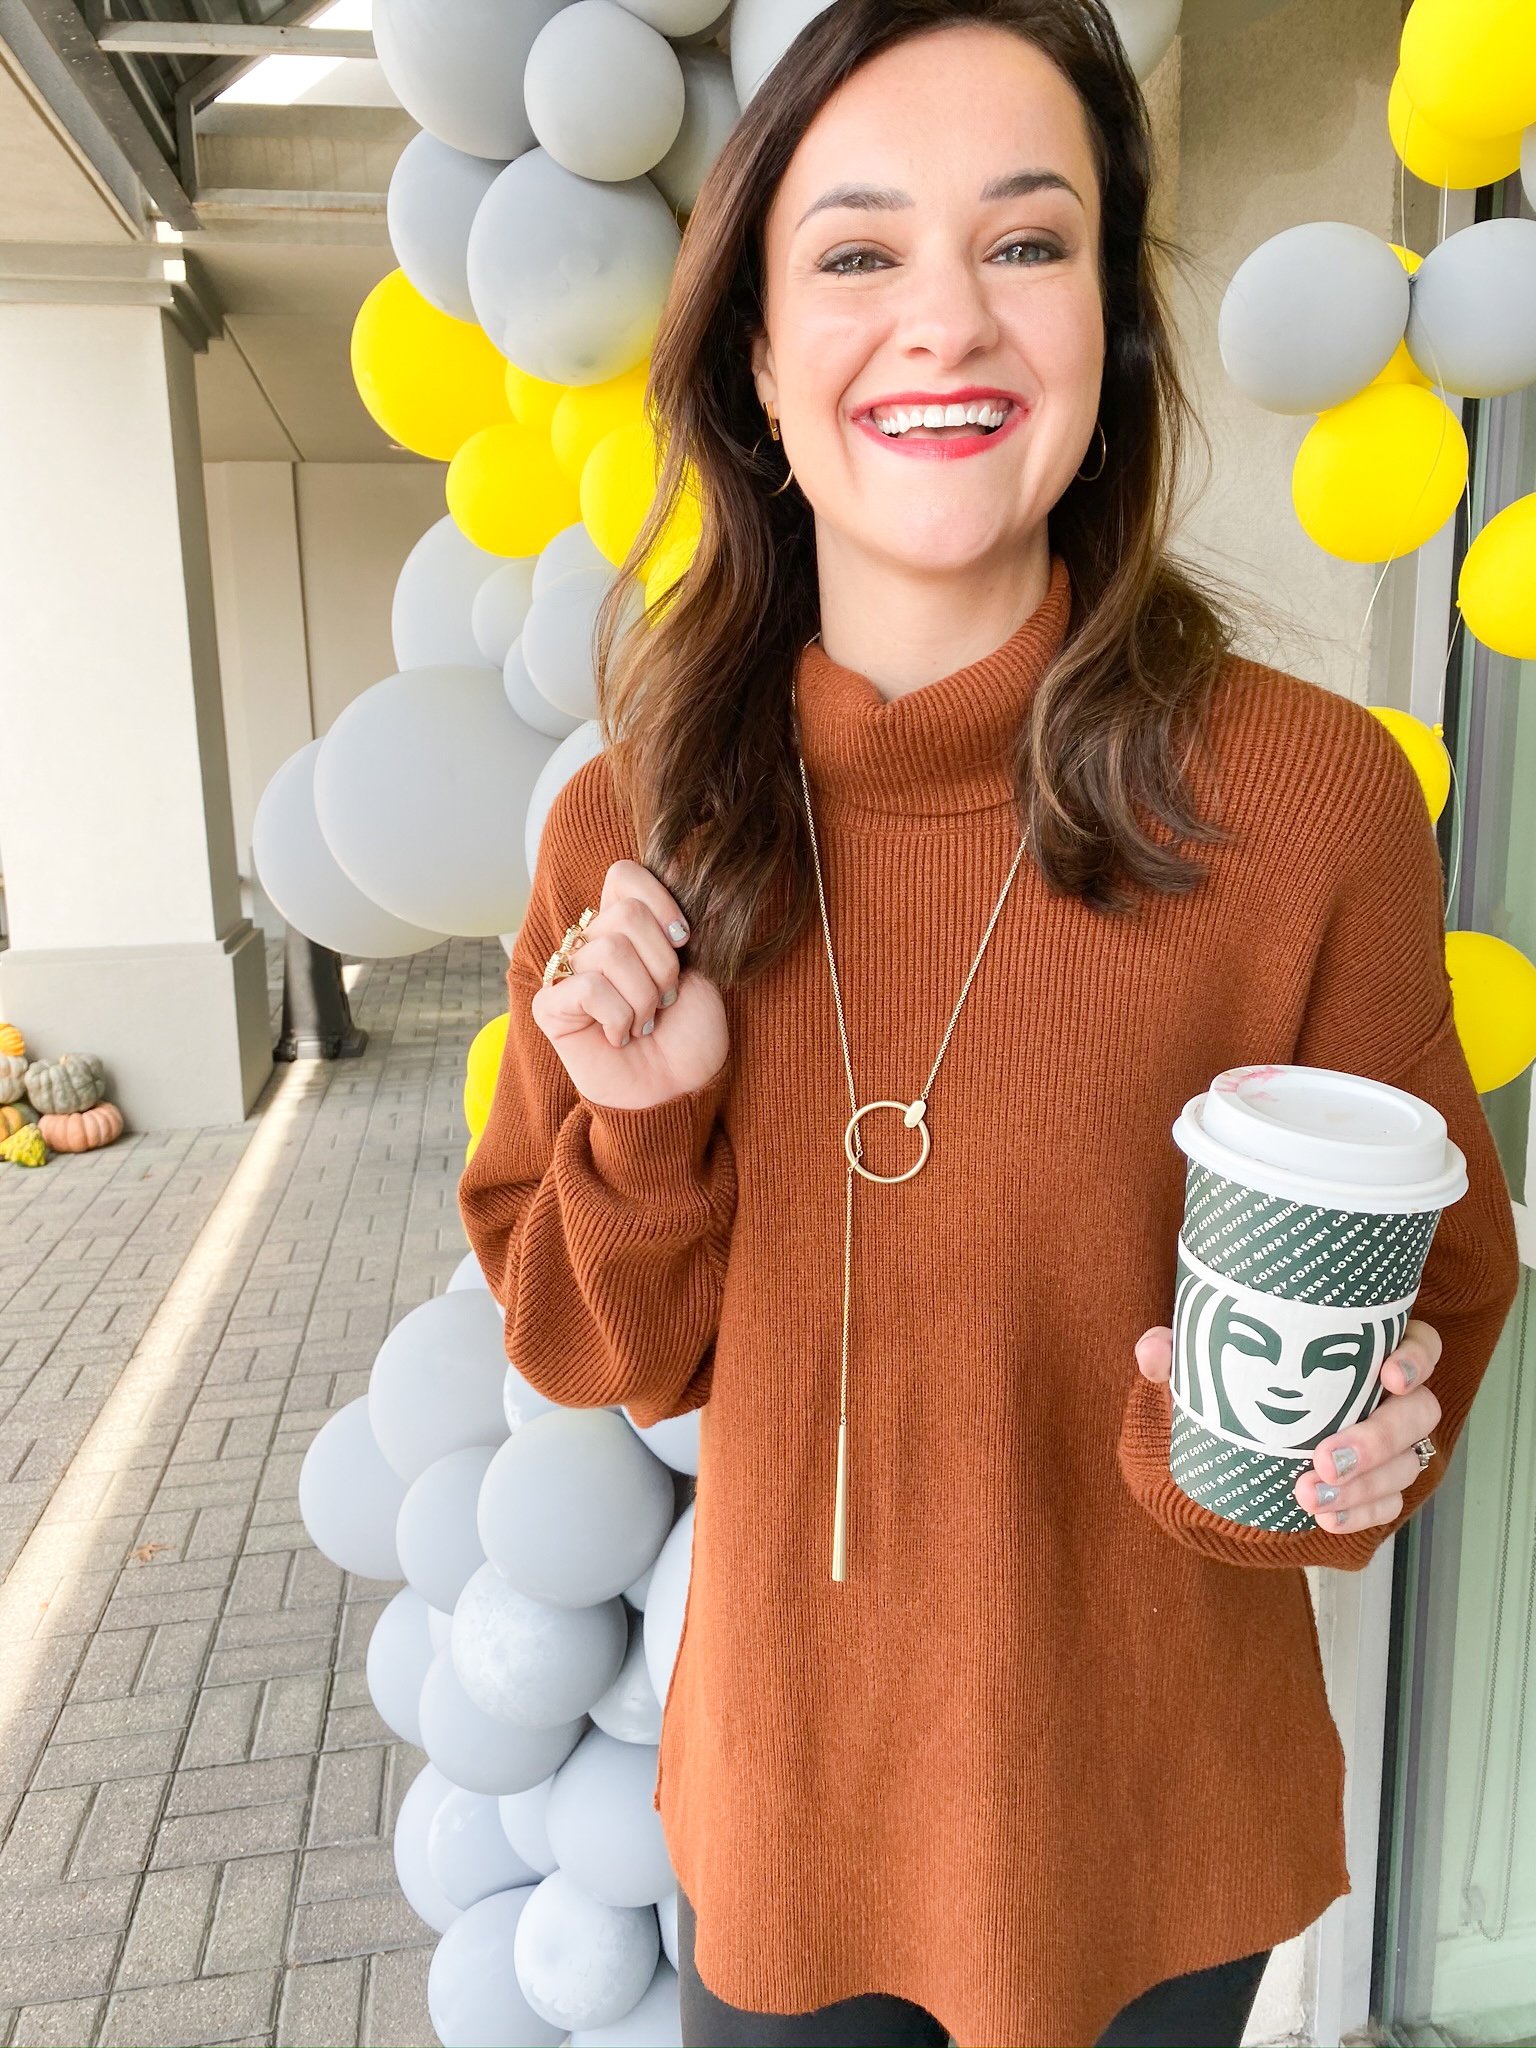 Holiday Honey Hustle Challenge Week 4 + Holiday Starbucks Drinks with Macros by Life + Style blogger, Heather Brown // My Life Well Loved